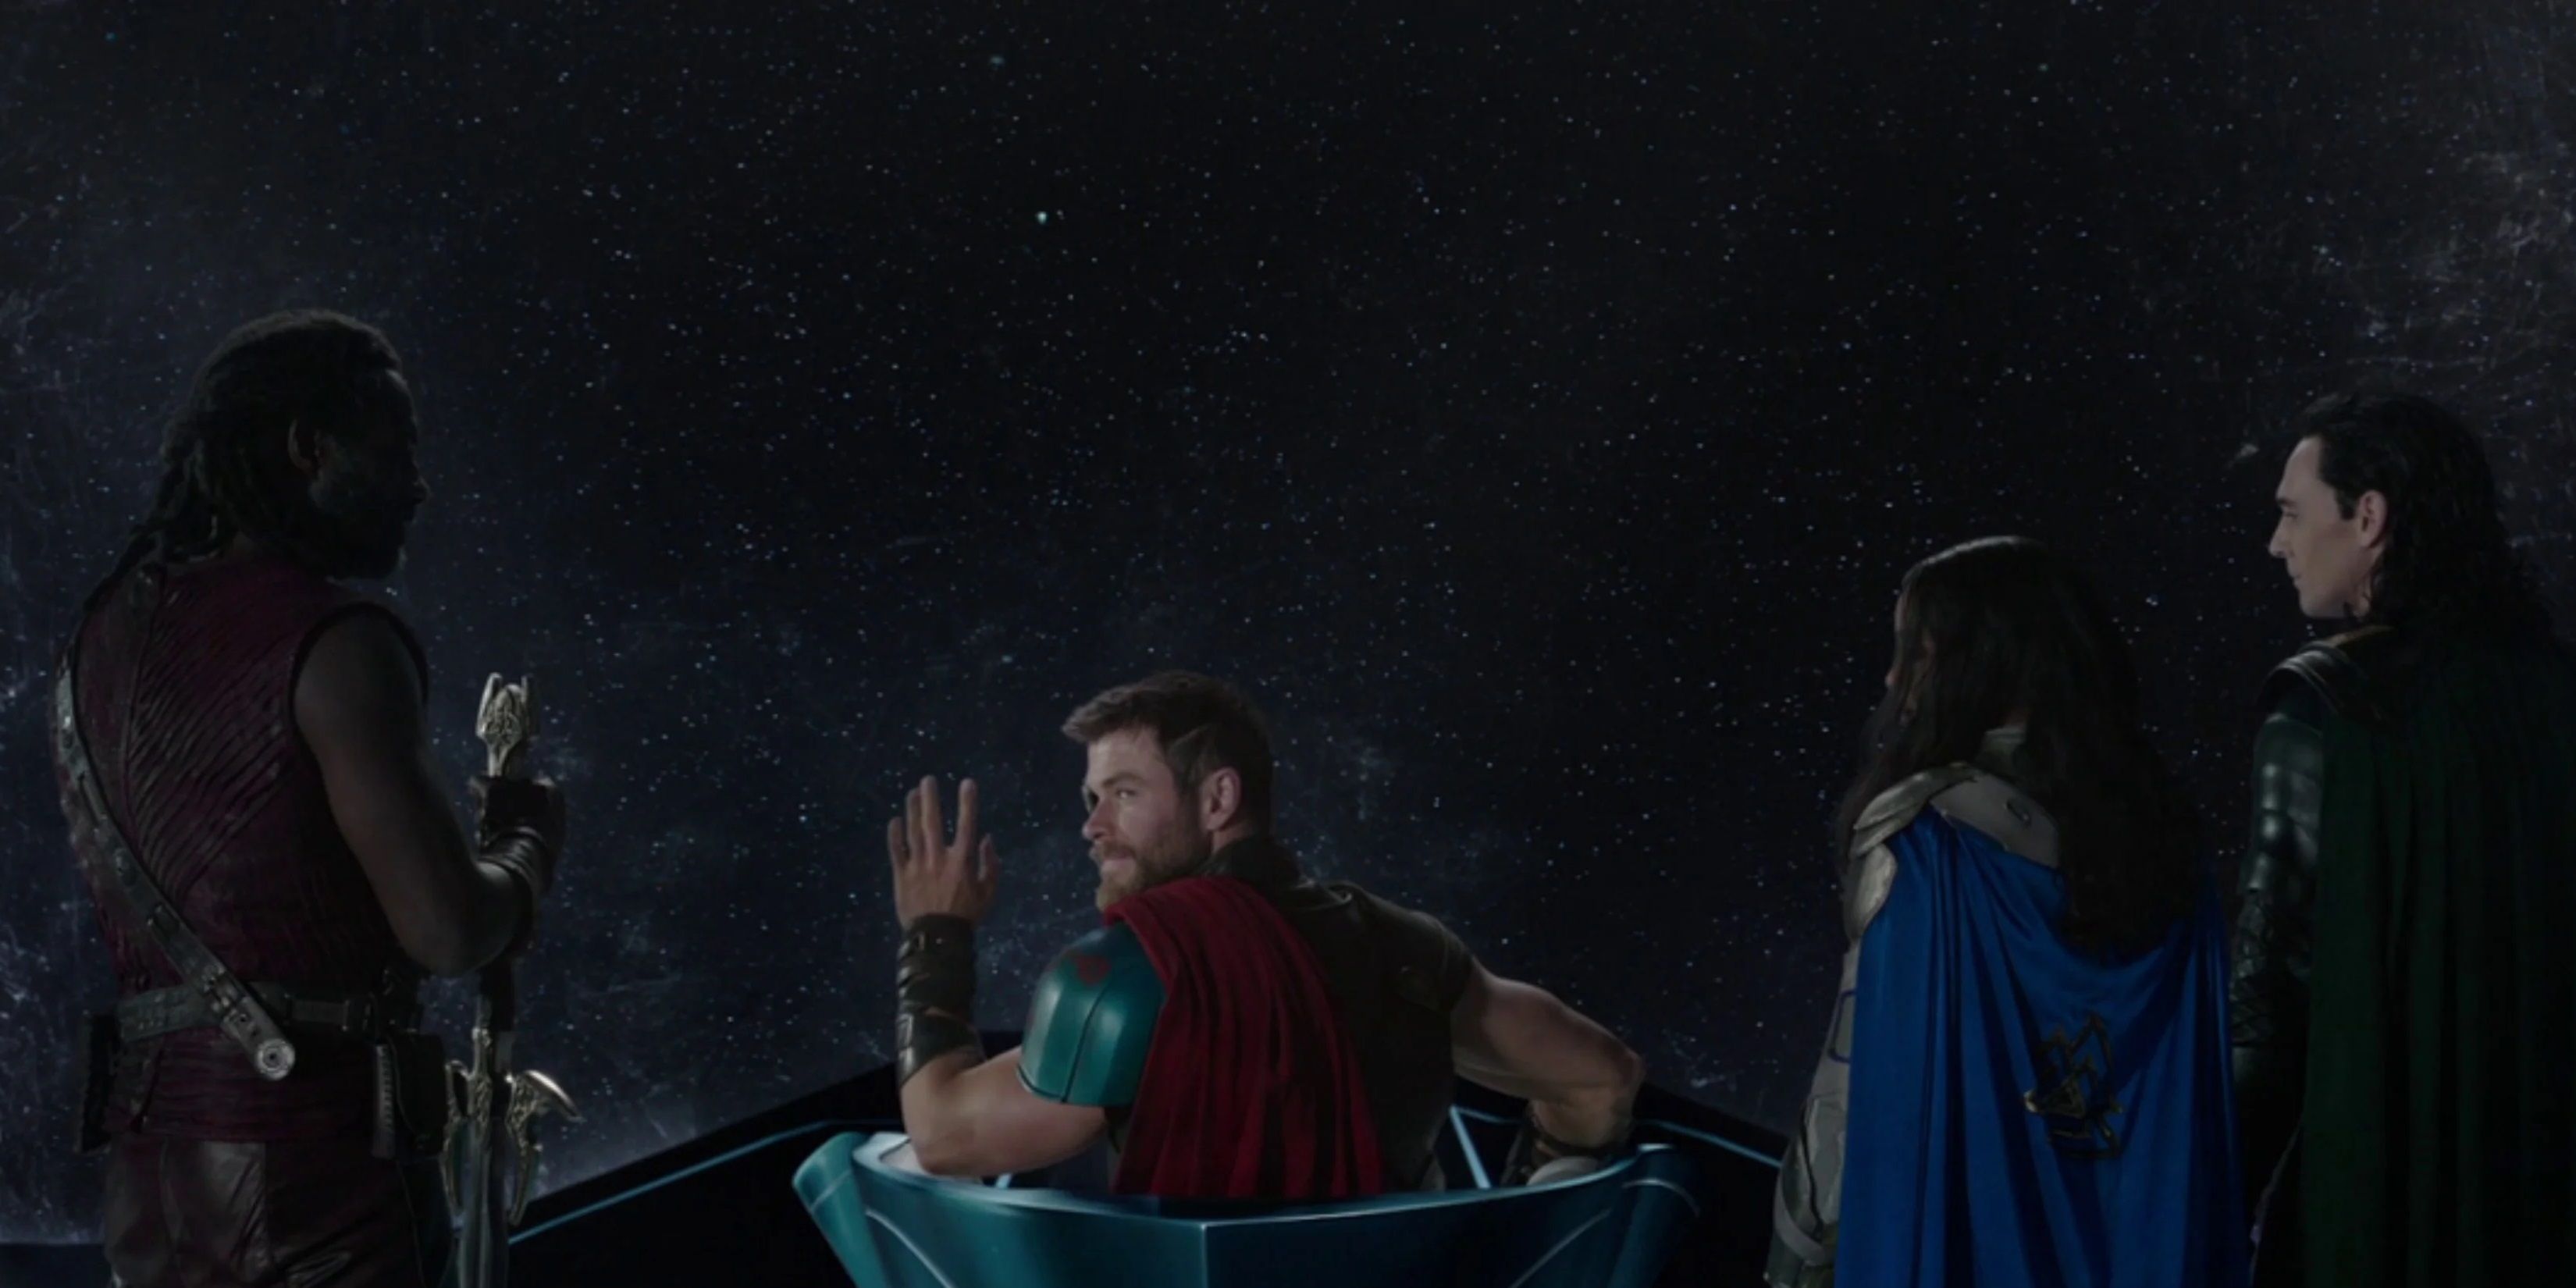 Thor takes leadership of his people at the end of Ragnarok